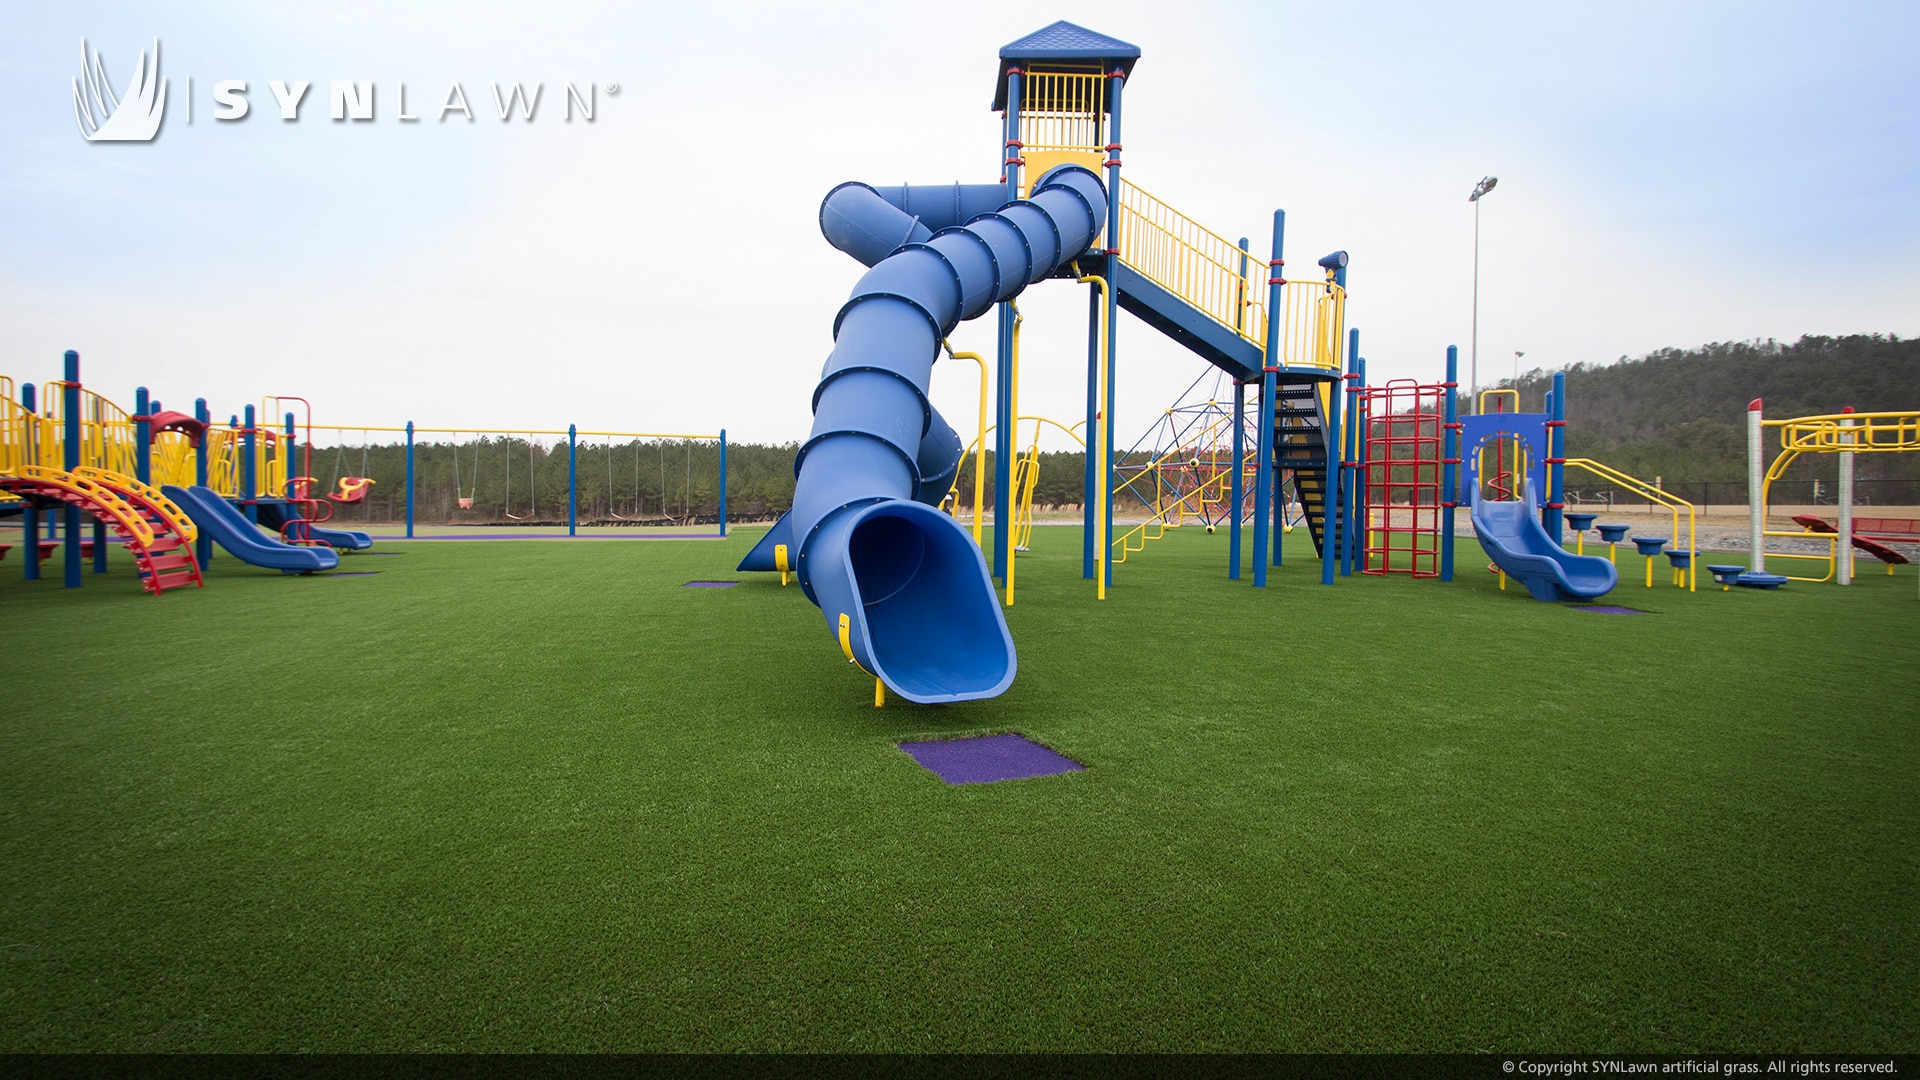 image of synlawn playground turf at peeples memorial play park